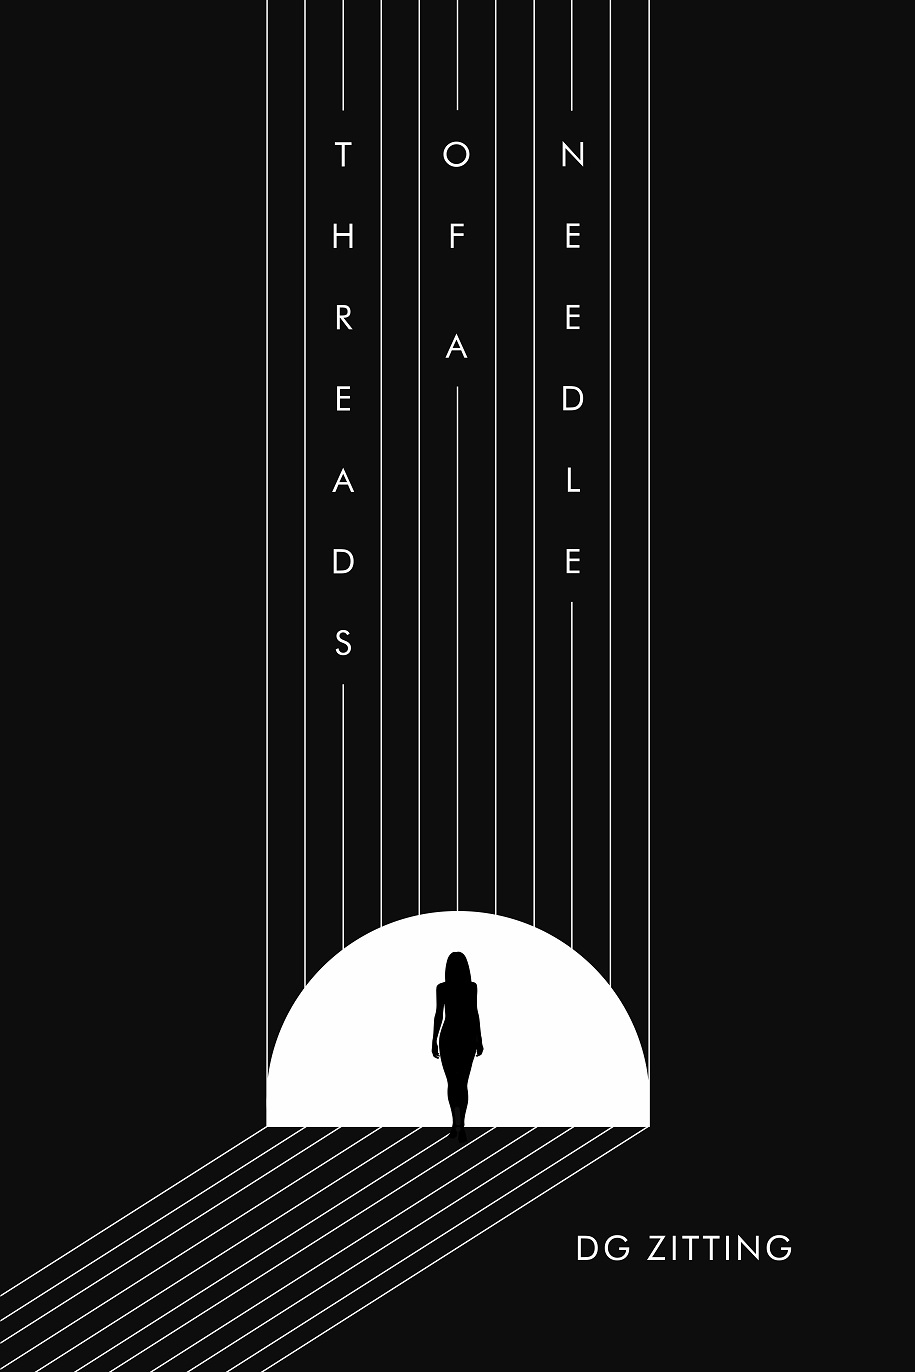 The front cover of Threads of a Needle: A Mind-Bending Sci-Fi Journey through Dimensional Probabilities by DG Zitting